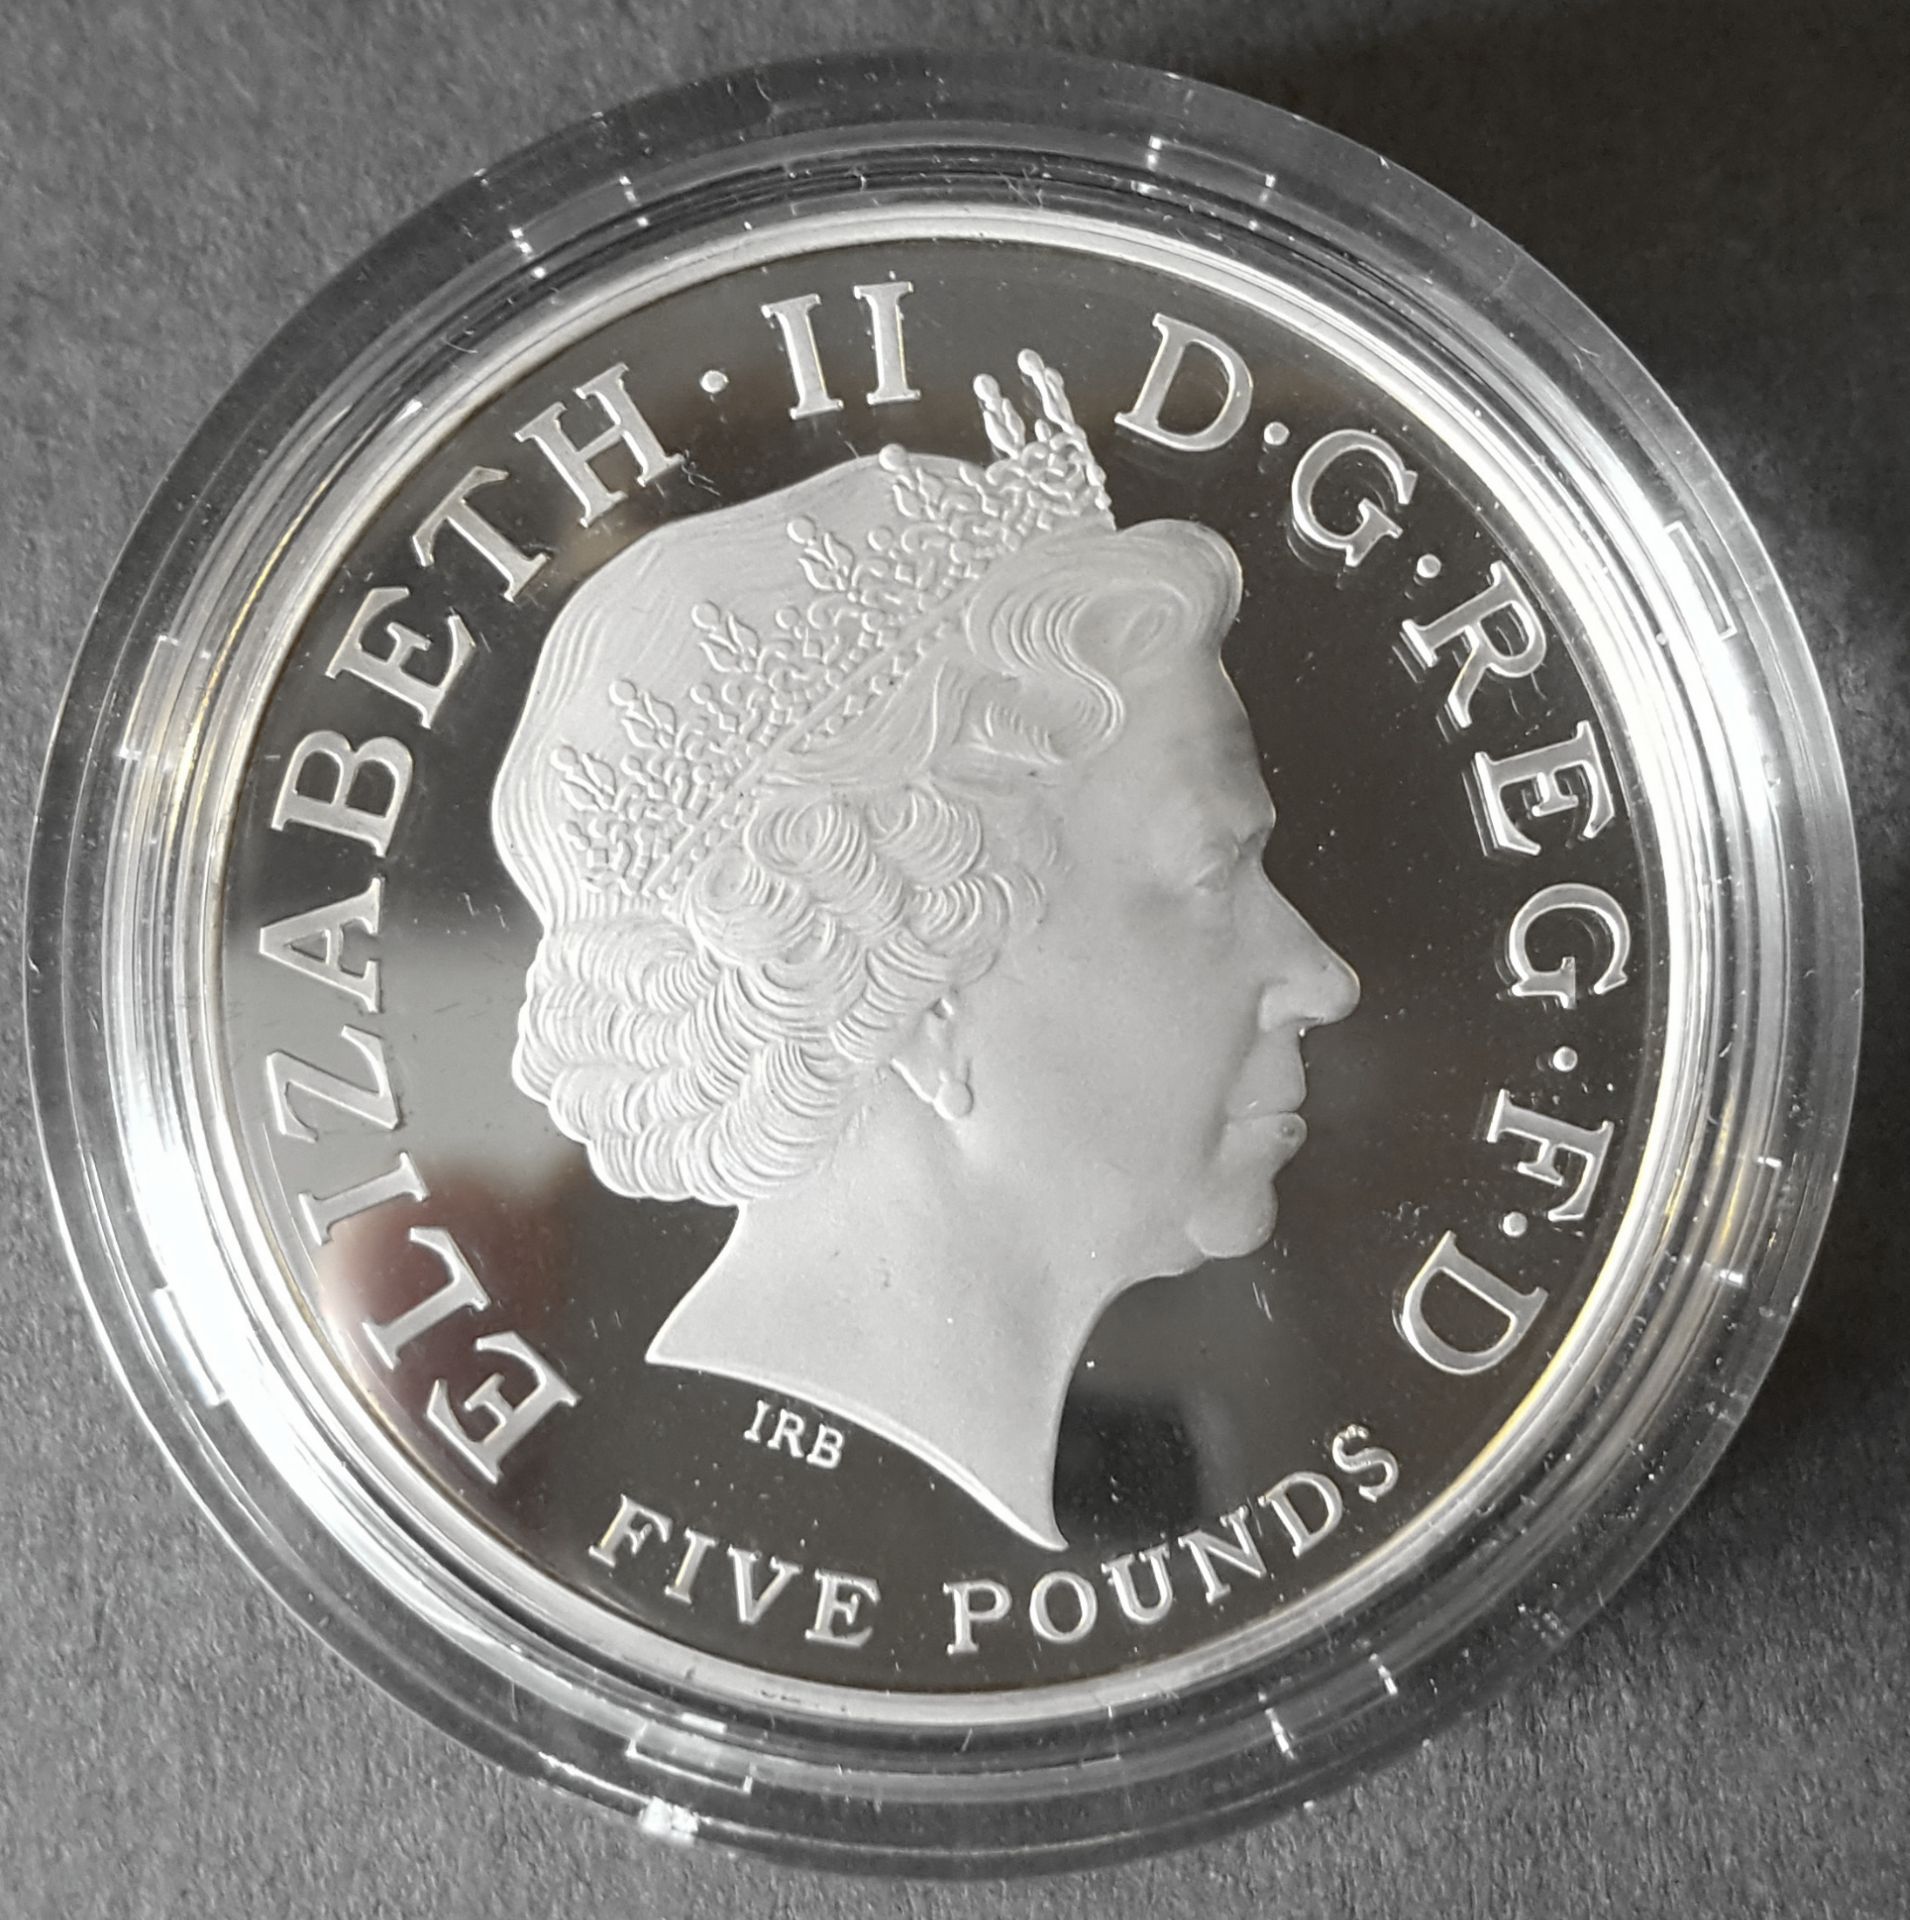 Collectable Proof Coin Silver Piedfort Proof Crown 2006 Queen Elizabeth II 80th Birthday - Image 2 of 5